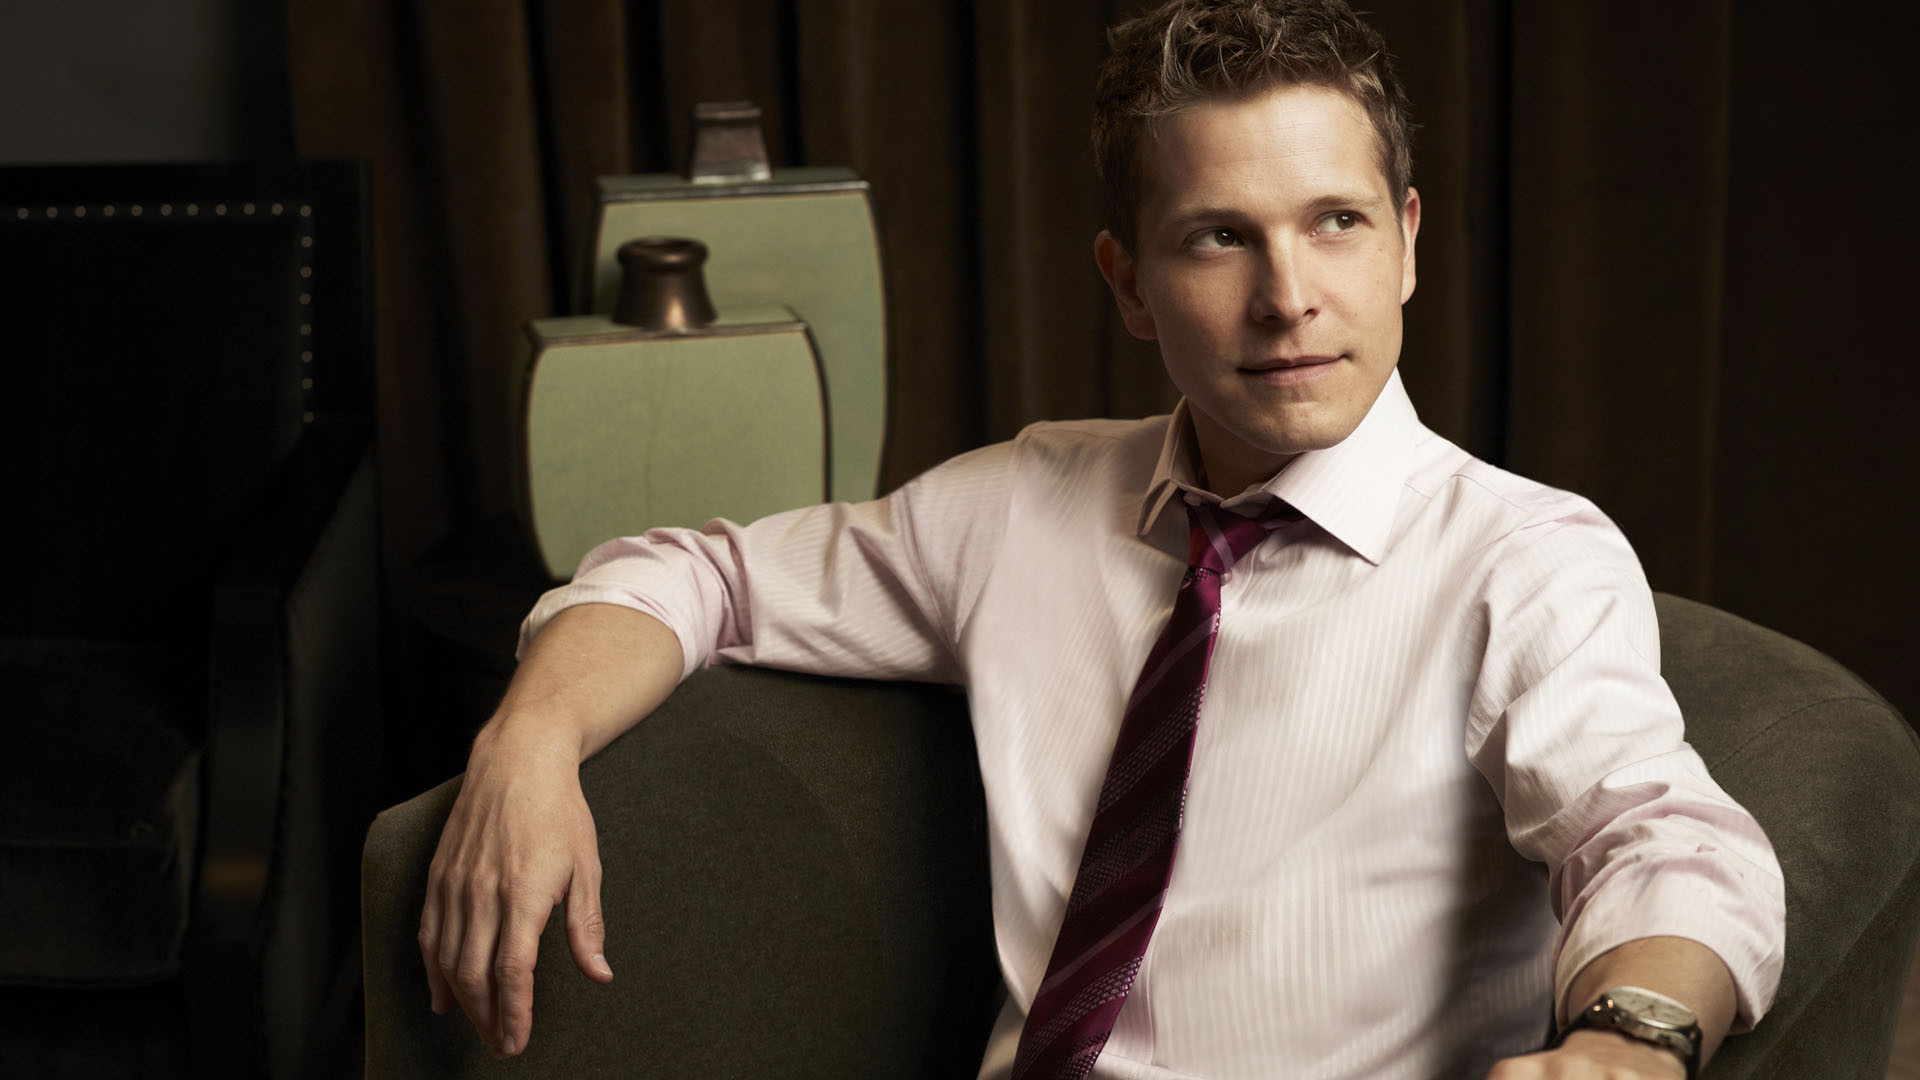 The Good Wife (TV Series): Matt Czuchry, An American actor and producer, Cary Agos. 1920x1080 Full HD Background.